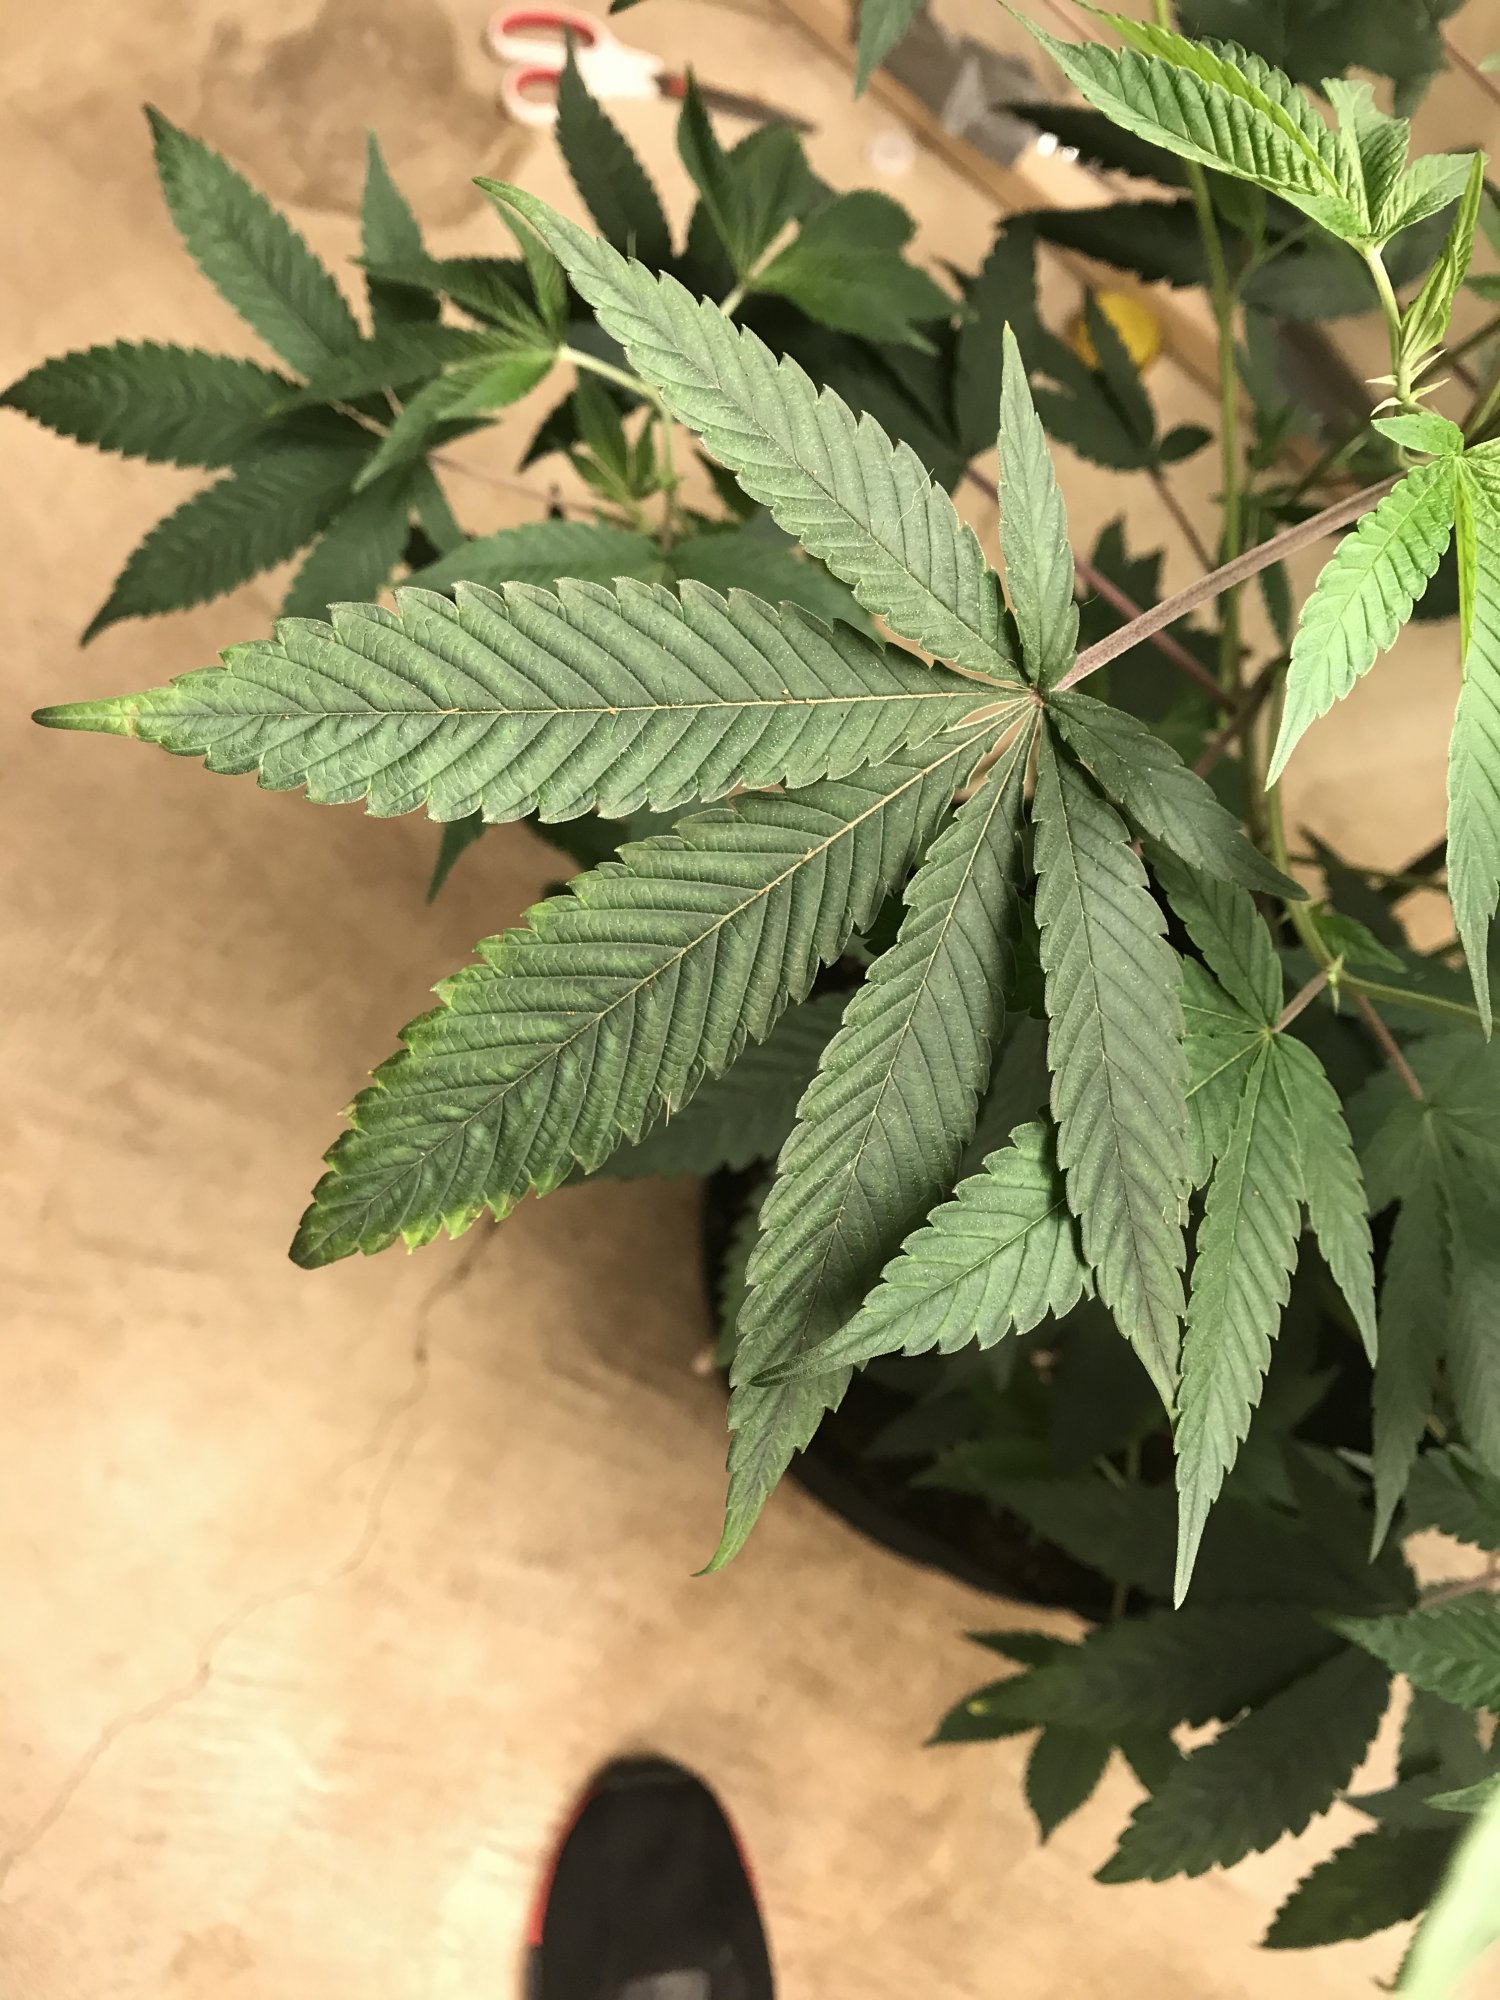 Leaf tips clawing yellowing tips and edges